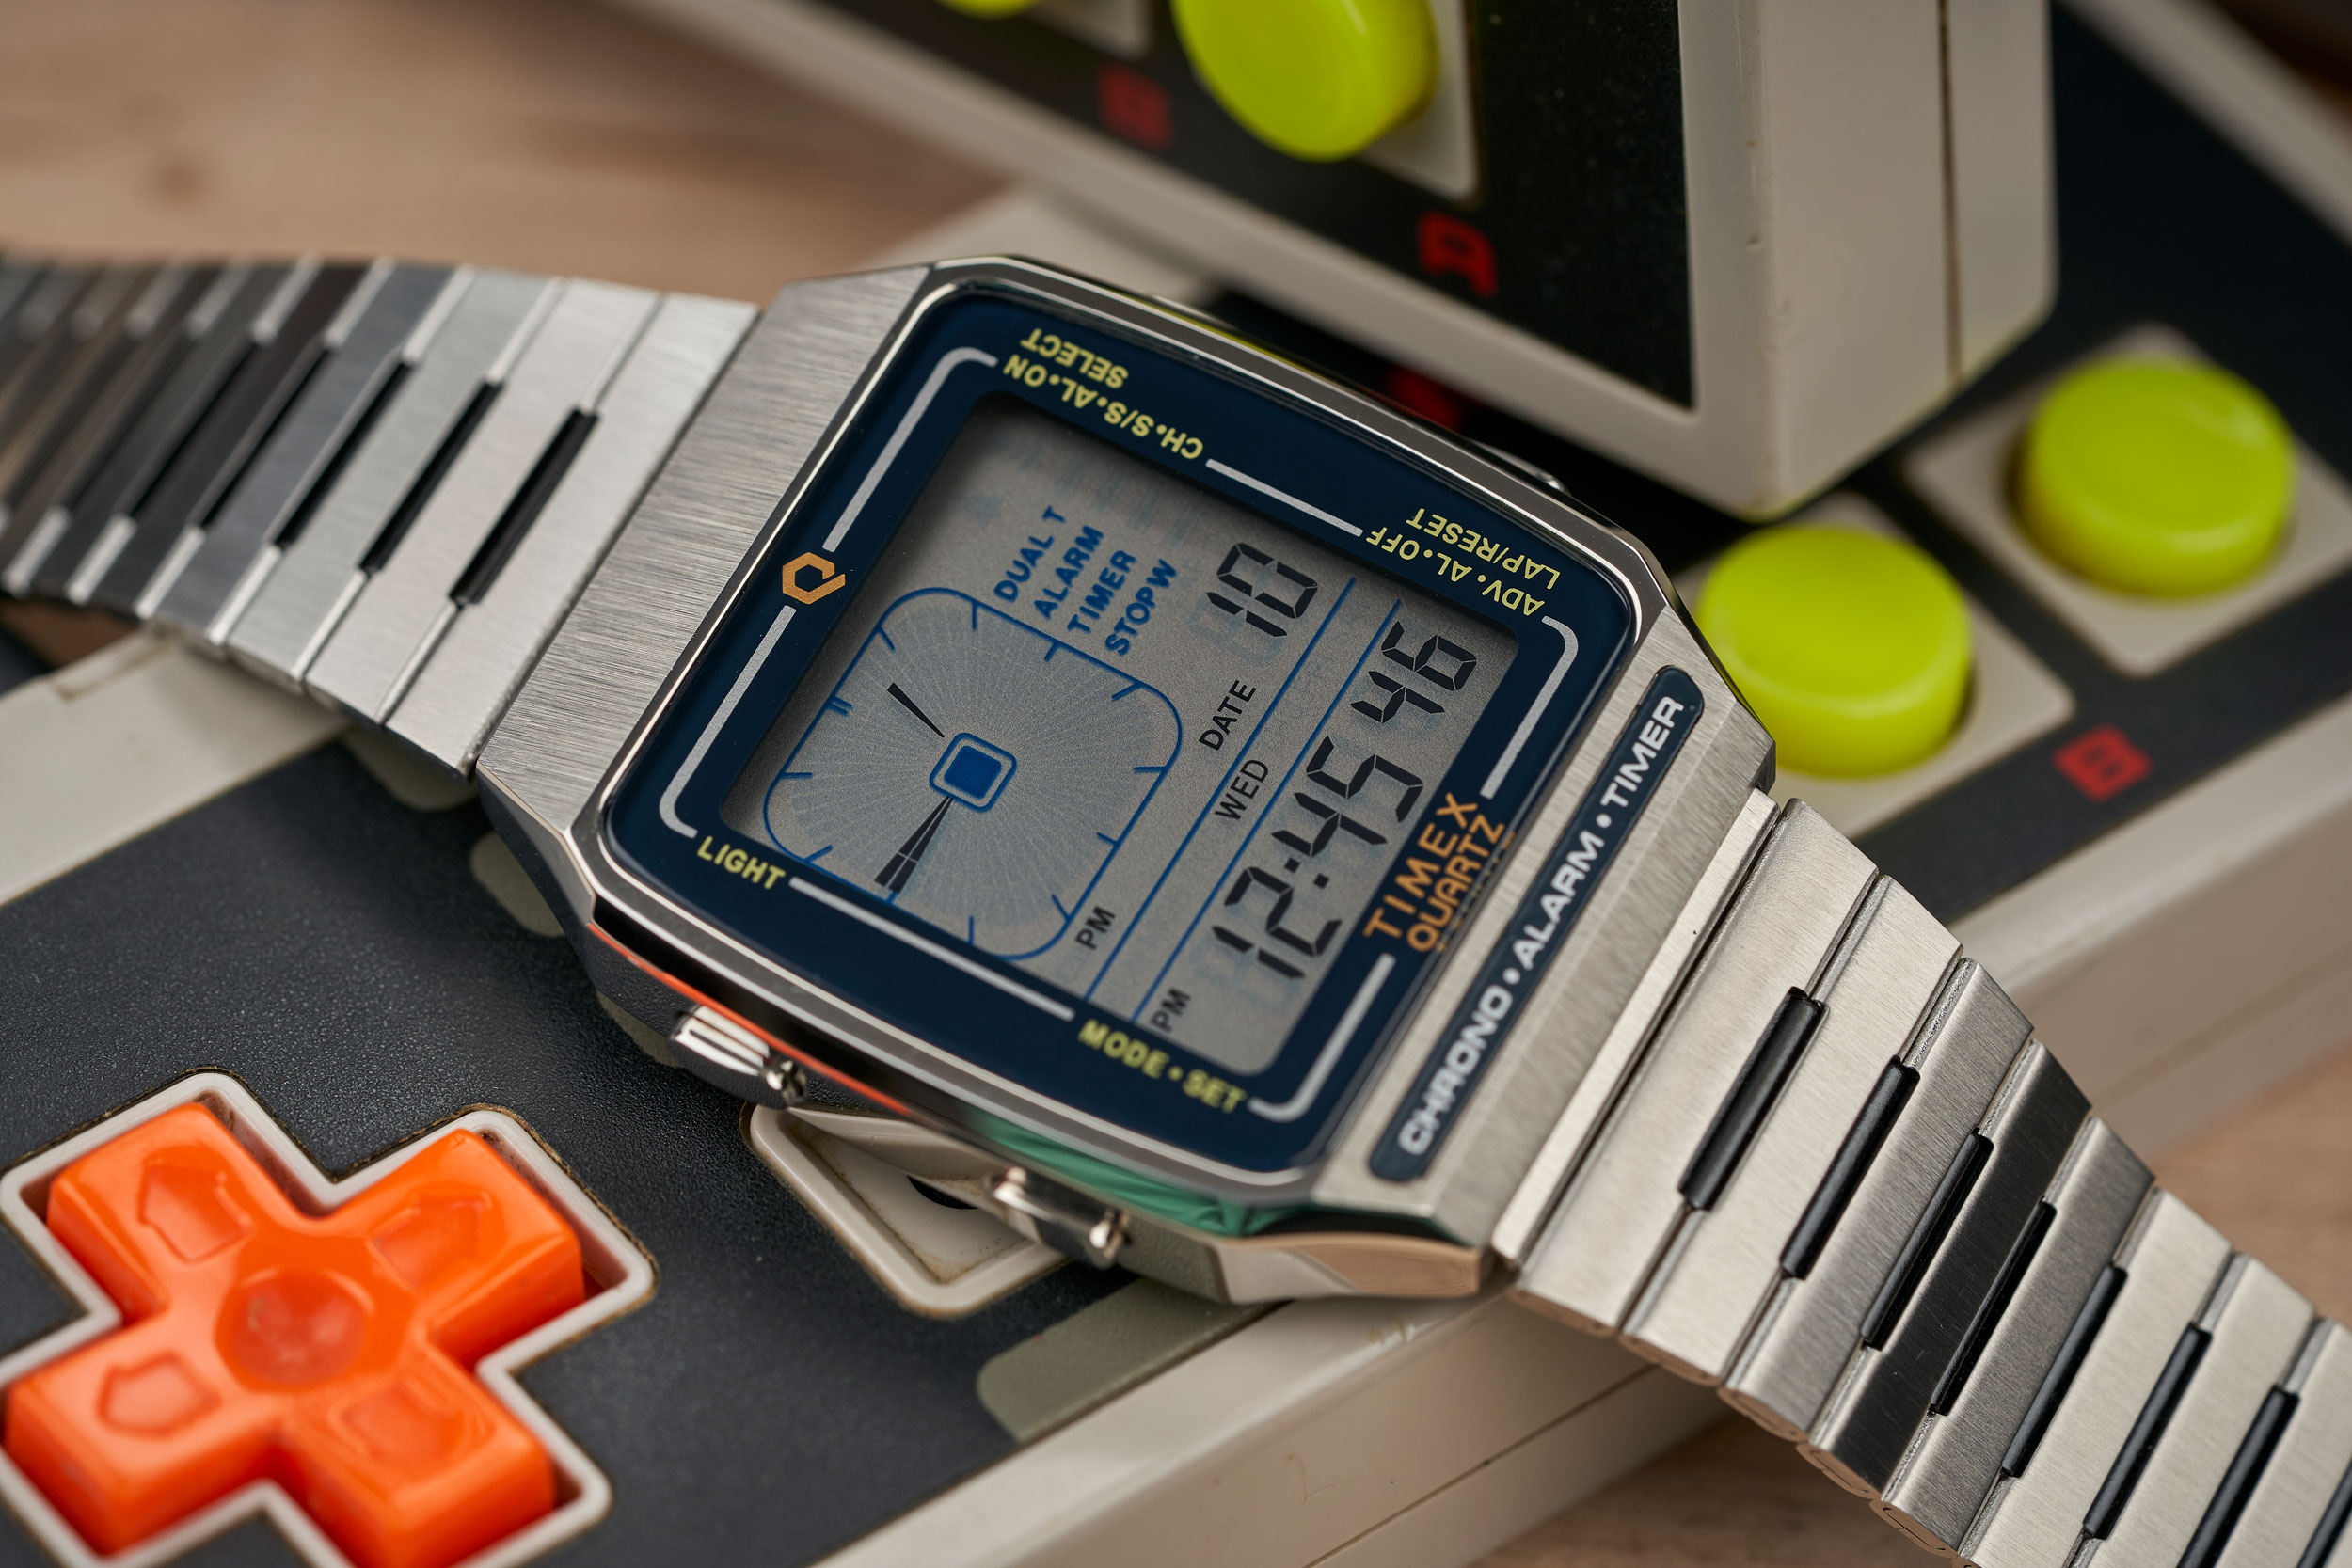 Introducing the Q Timex Reissue LCA - Now Available at the Windup 